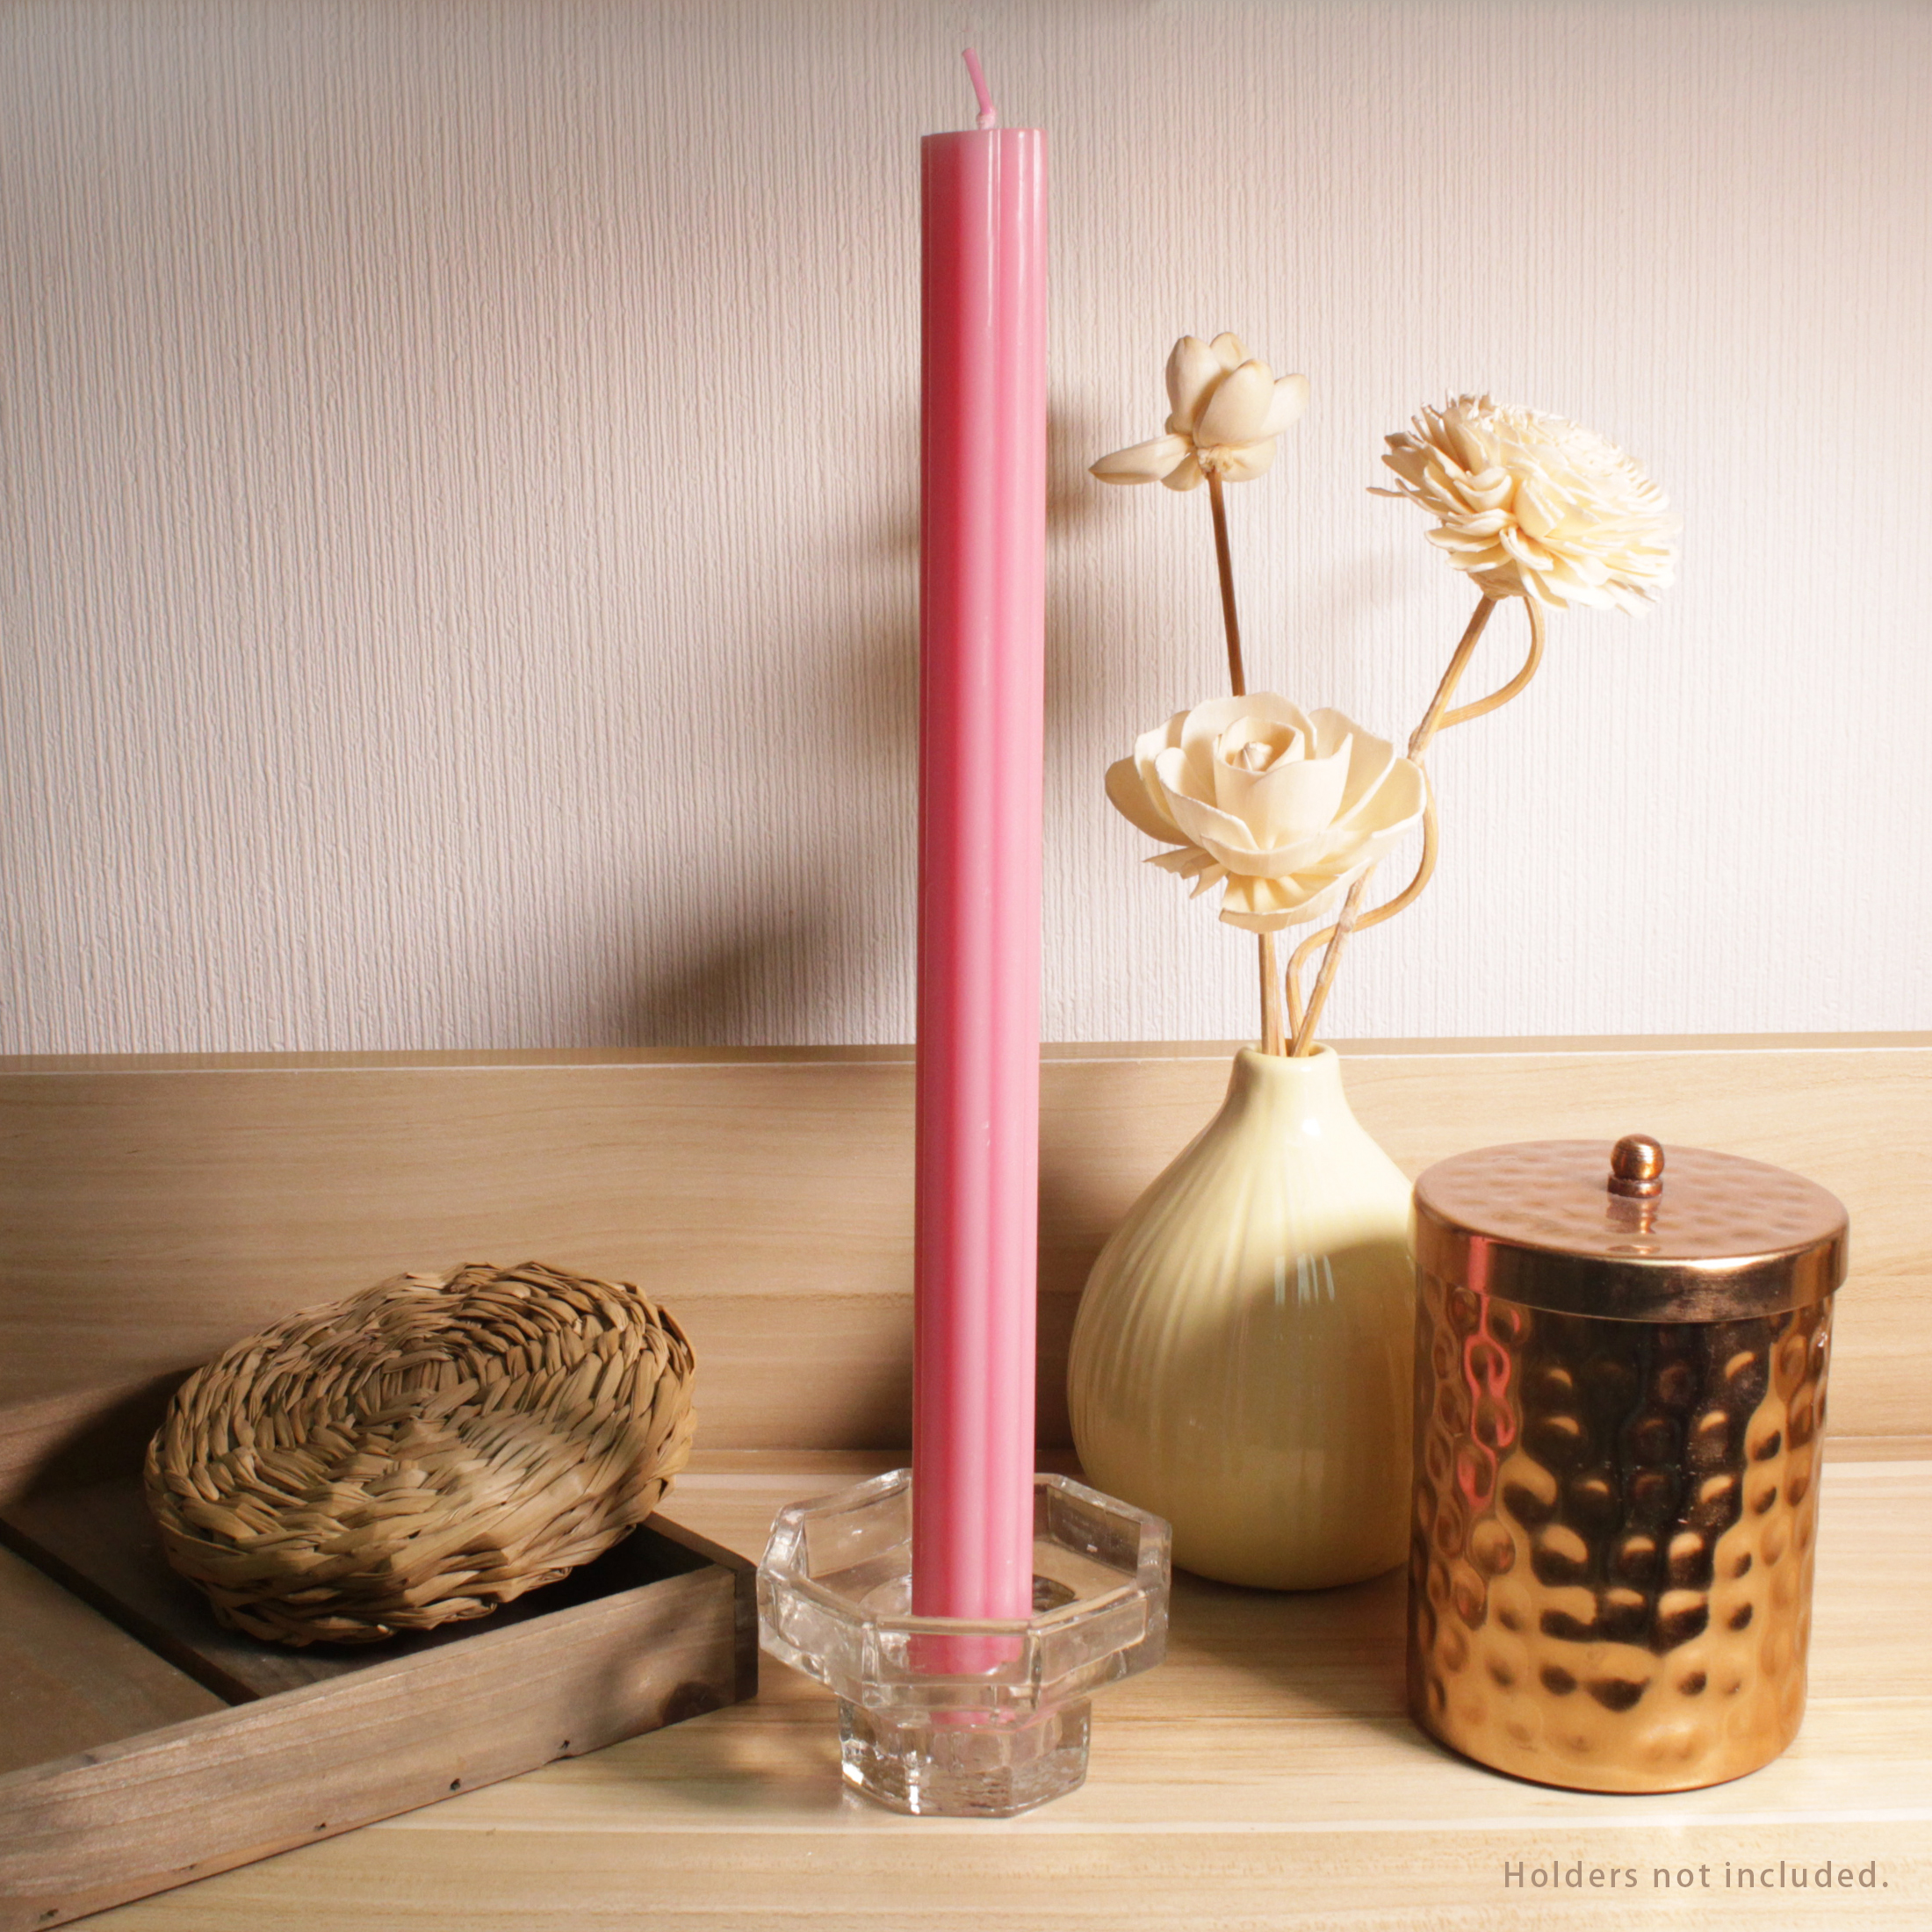 Better Homes & Gardens Unscented Taper Candles, Pink, 2-Pack, 11 inches Height - image 3 of 5